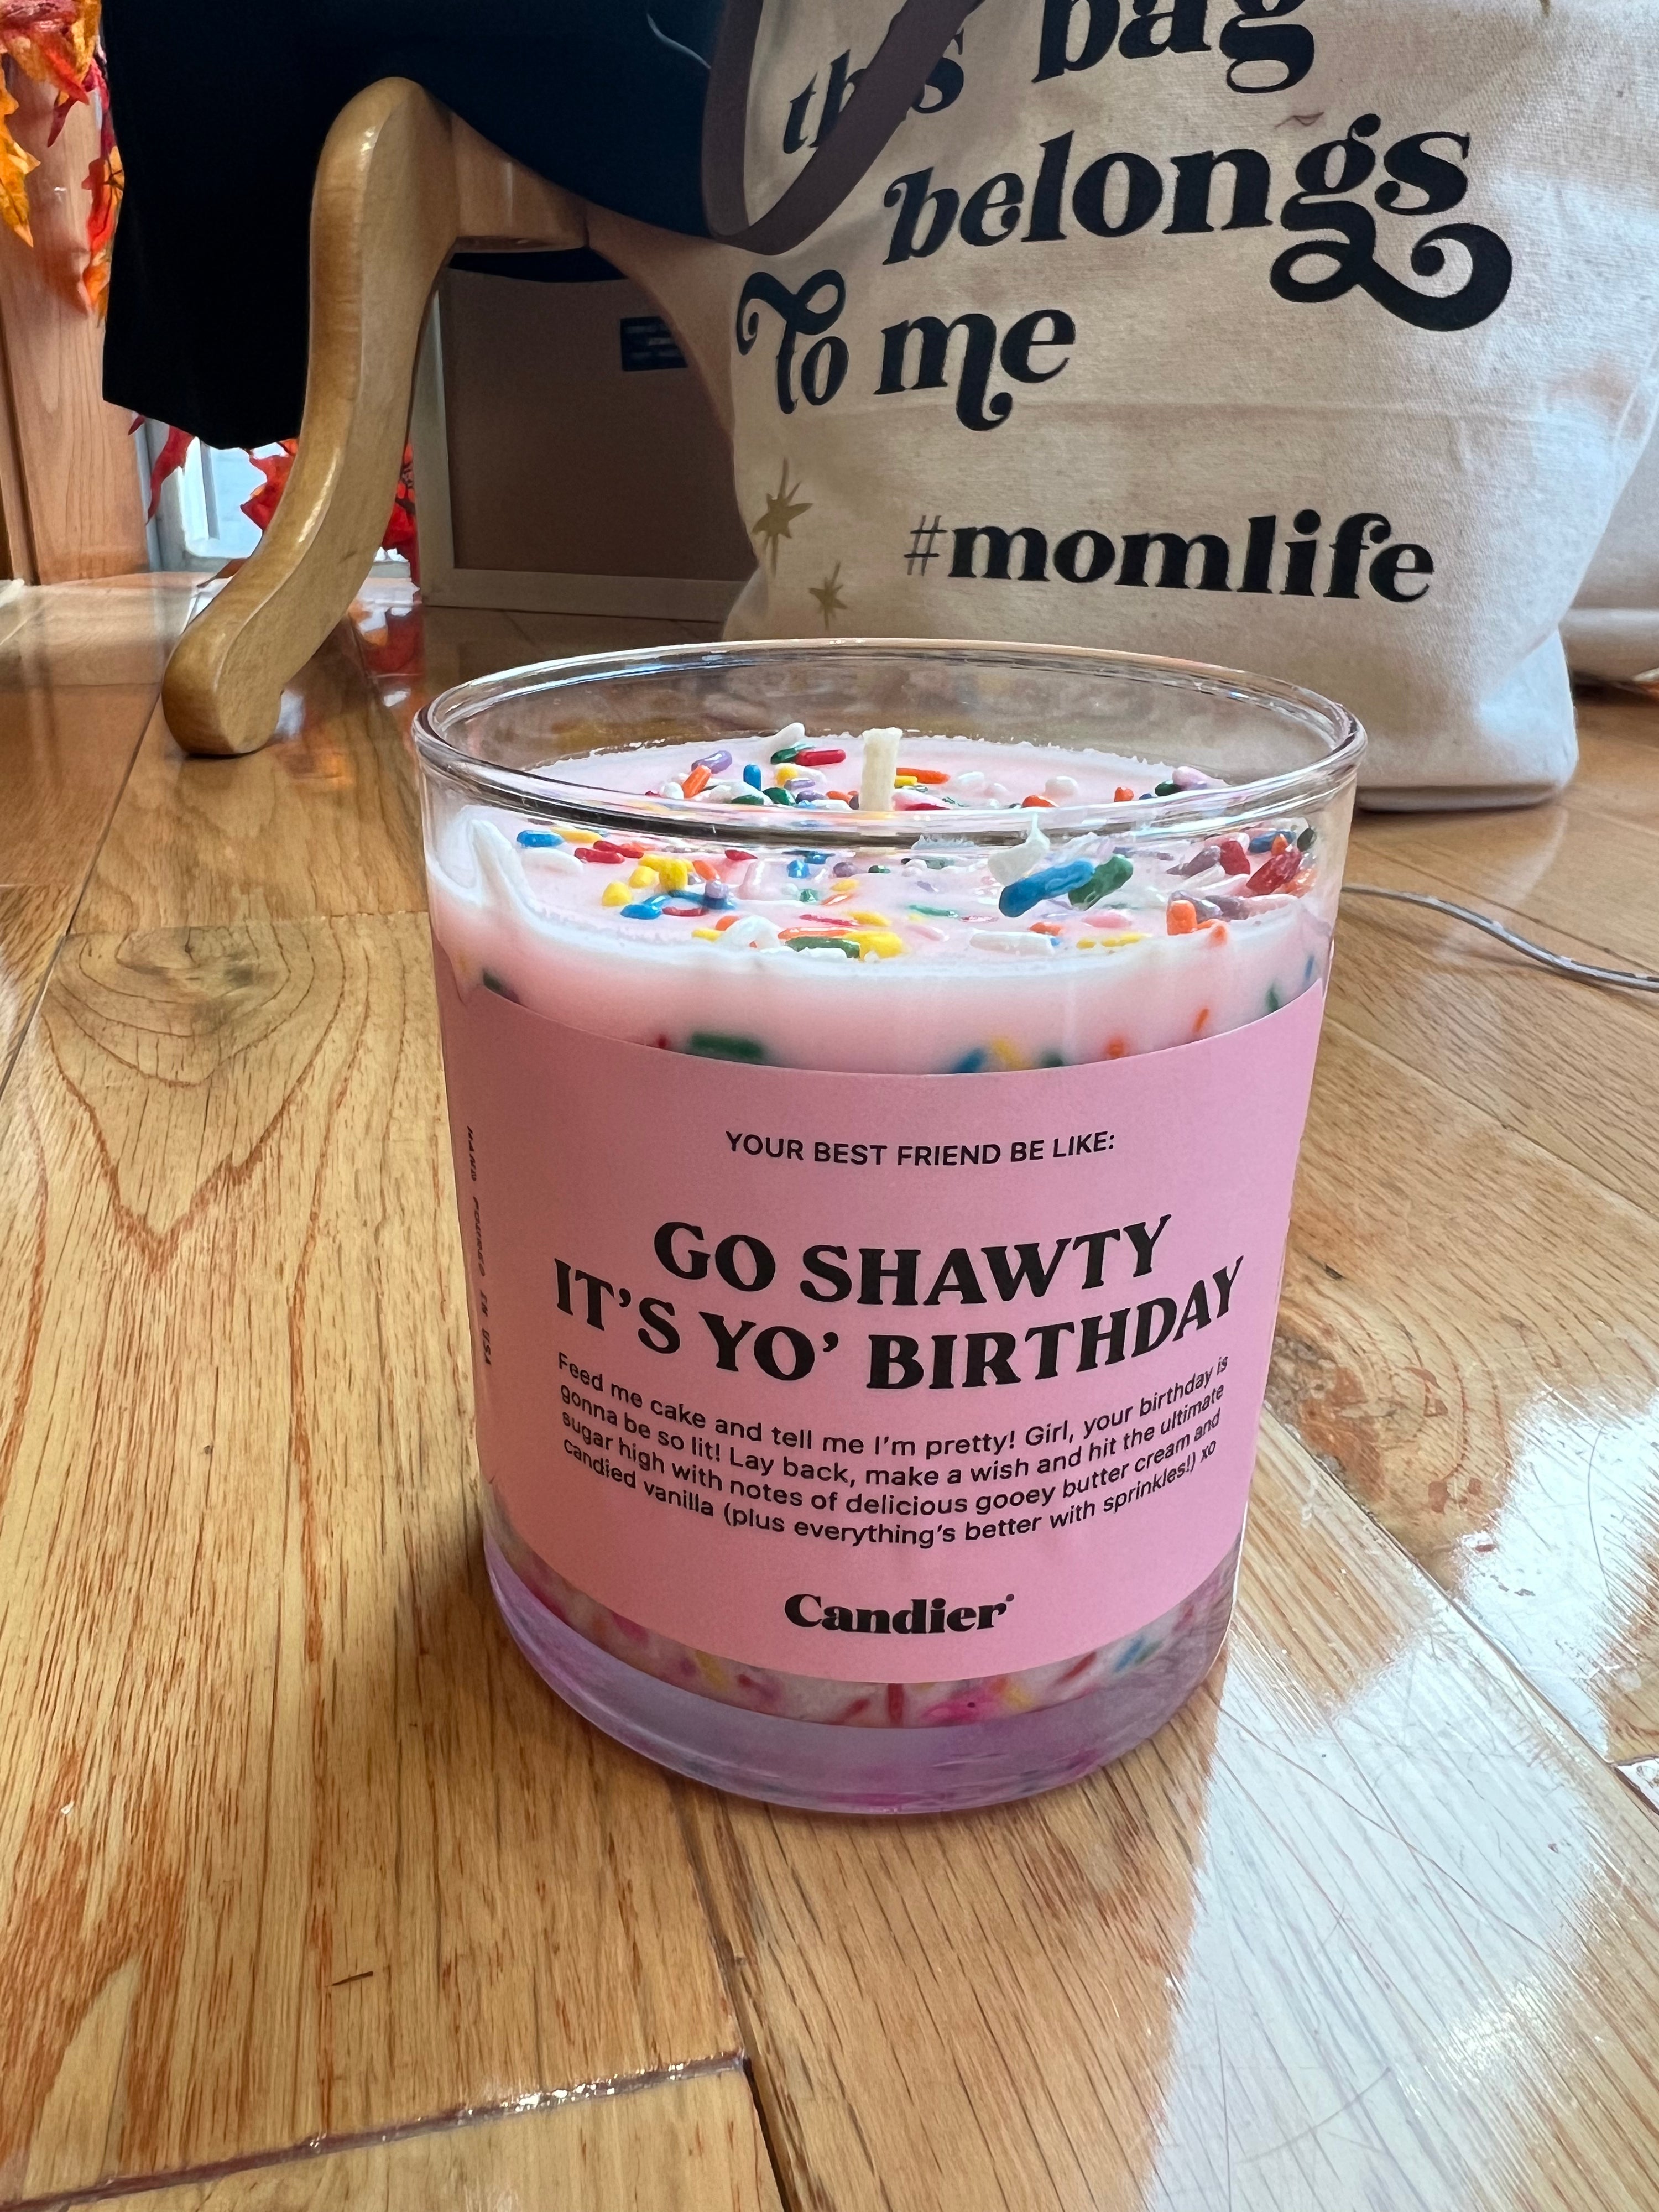 Candier "GO SHAWTY IT'S YOUR BIRTHDAY" 100% Soy Sprinkles candles